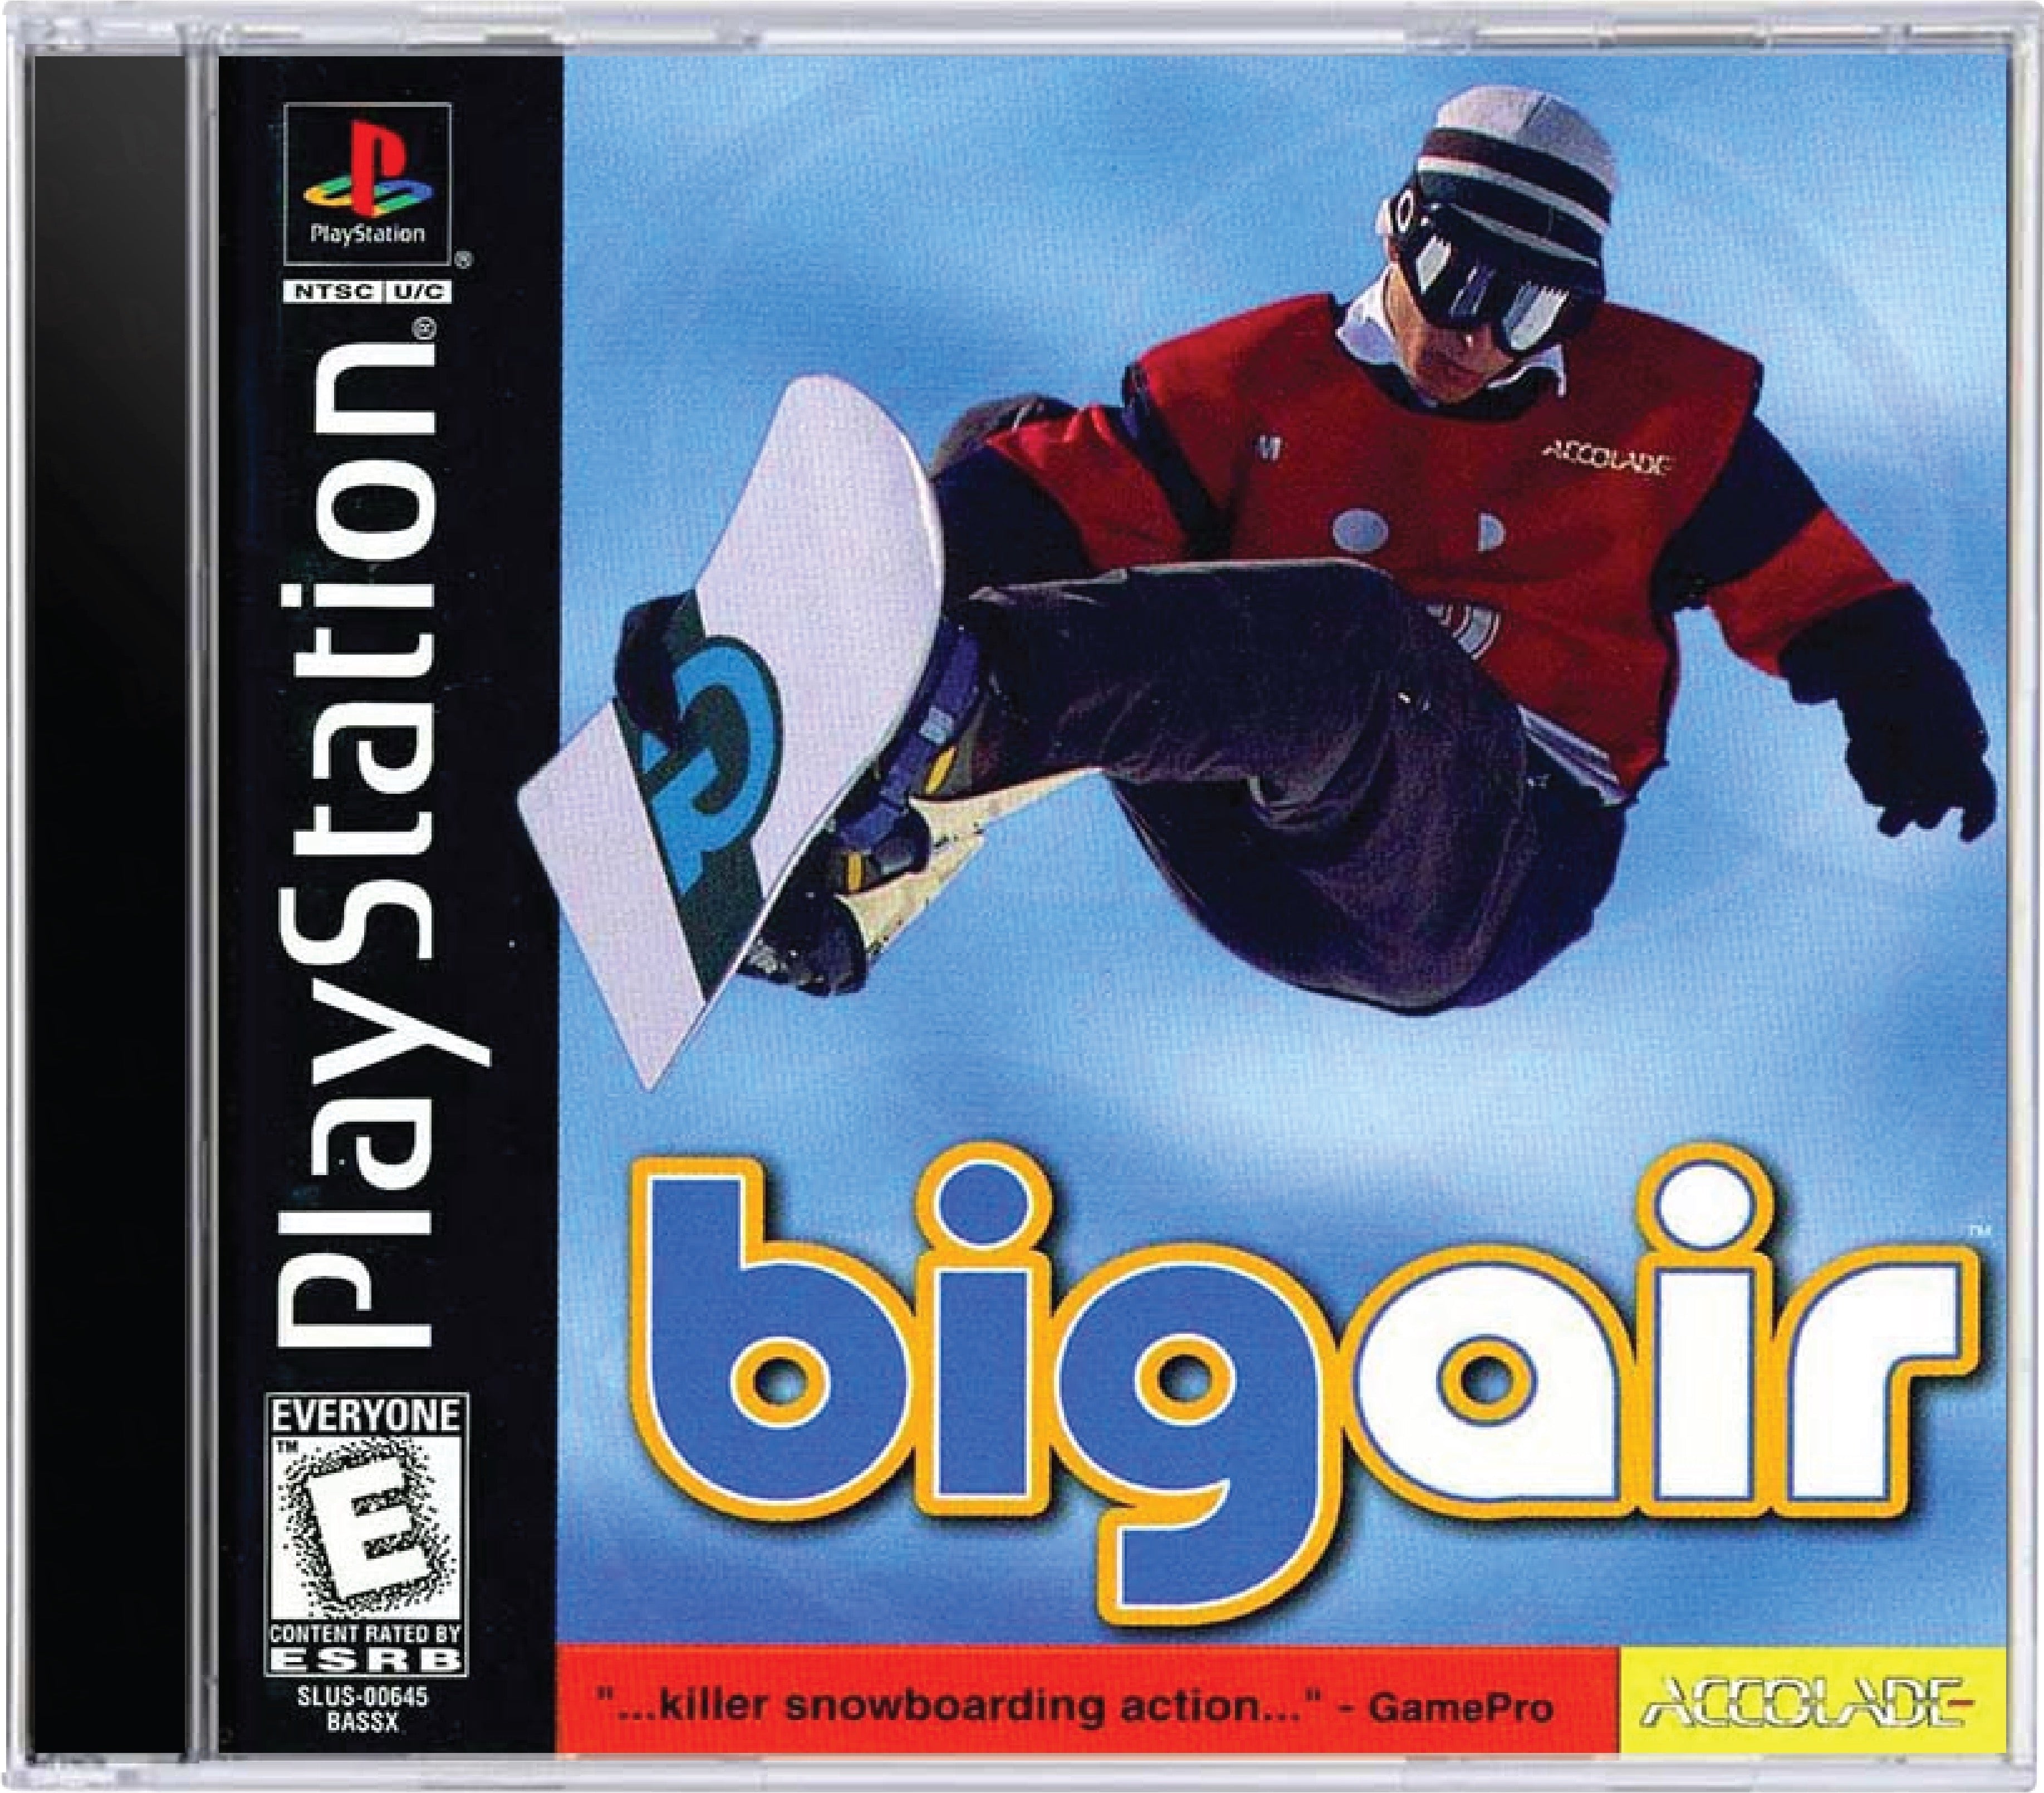 Big Air Cover Art and Product Photo